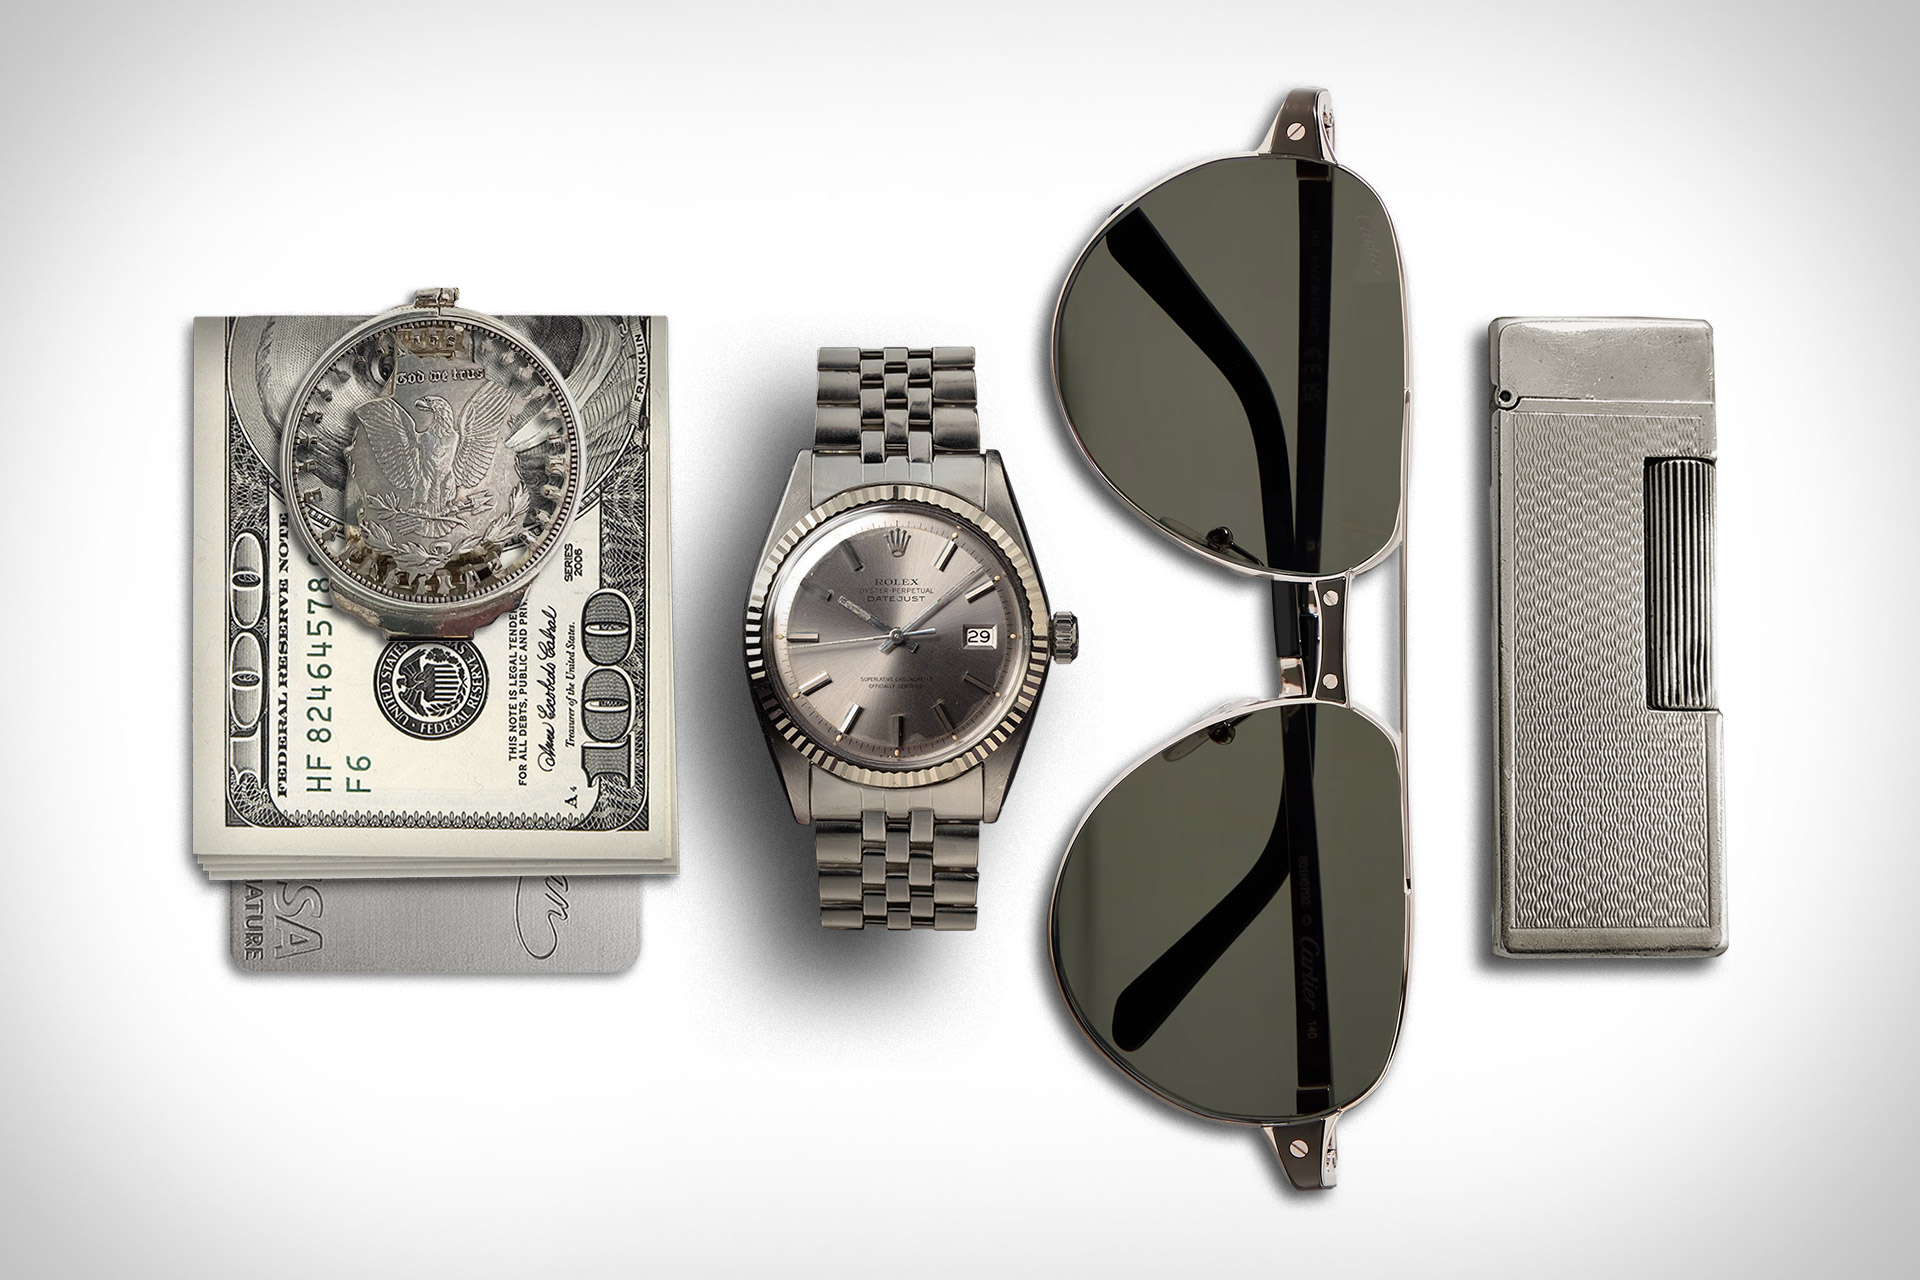 Everyday Carry: Silver Eagle | Uncrate, #Everyday #Carry #Silver #Eagle #Uncrate